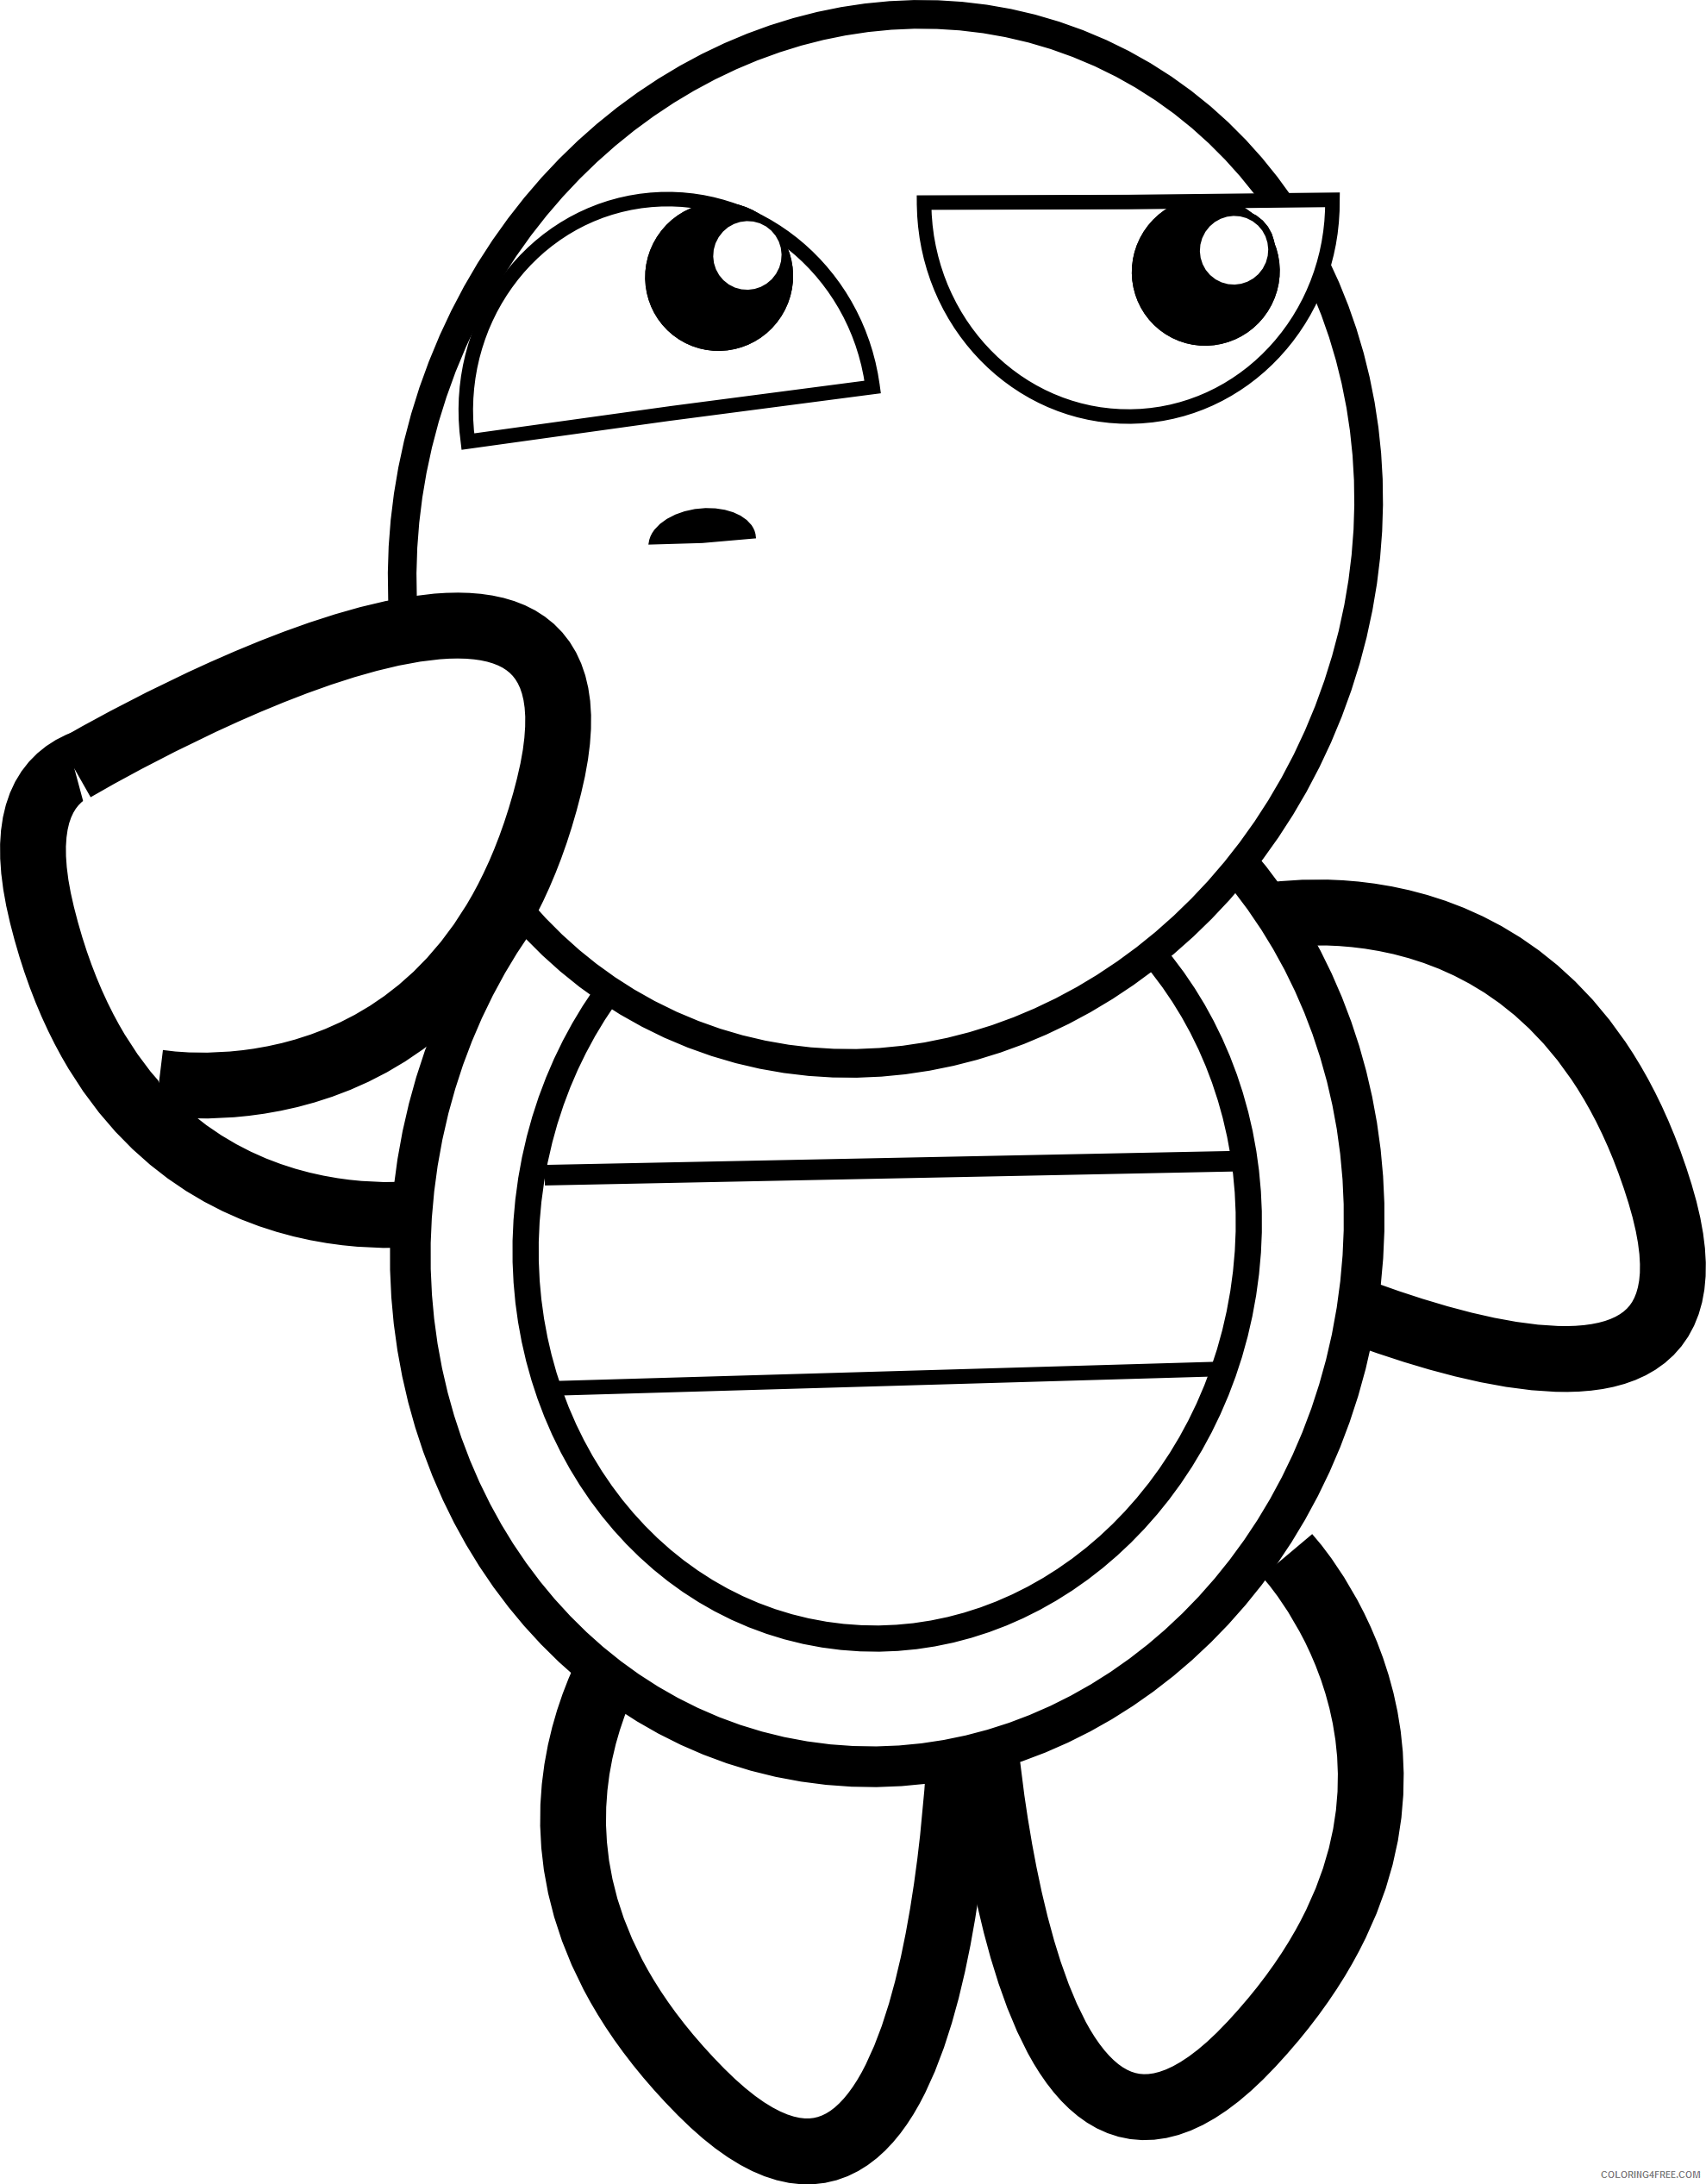 Turtle Outline Coloring Pages sea turtle black and Printable Coloring4free